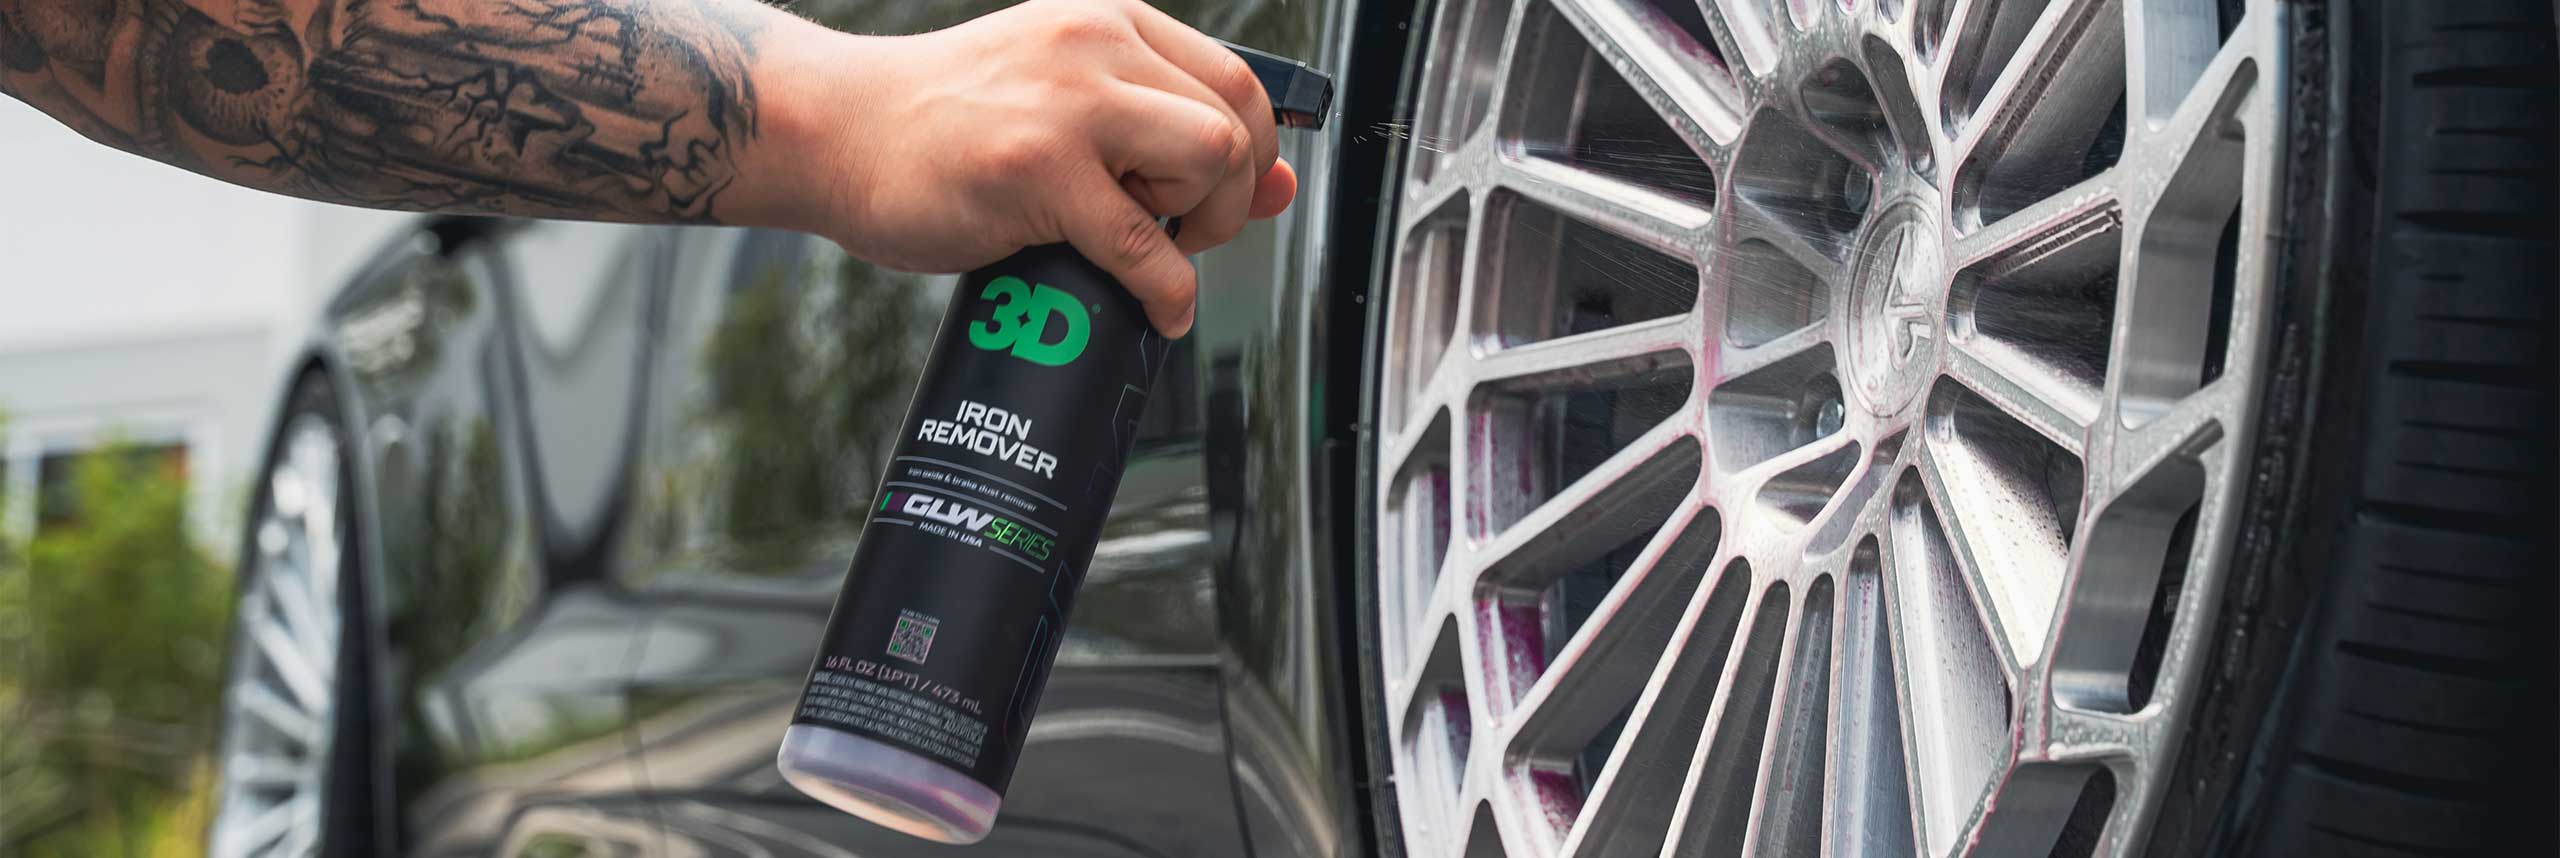 person spraying iron remover on silver aftermarket wheels